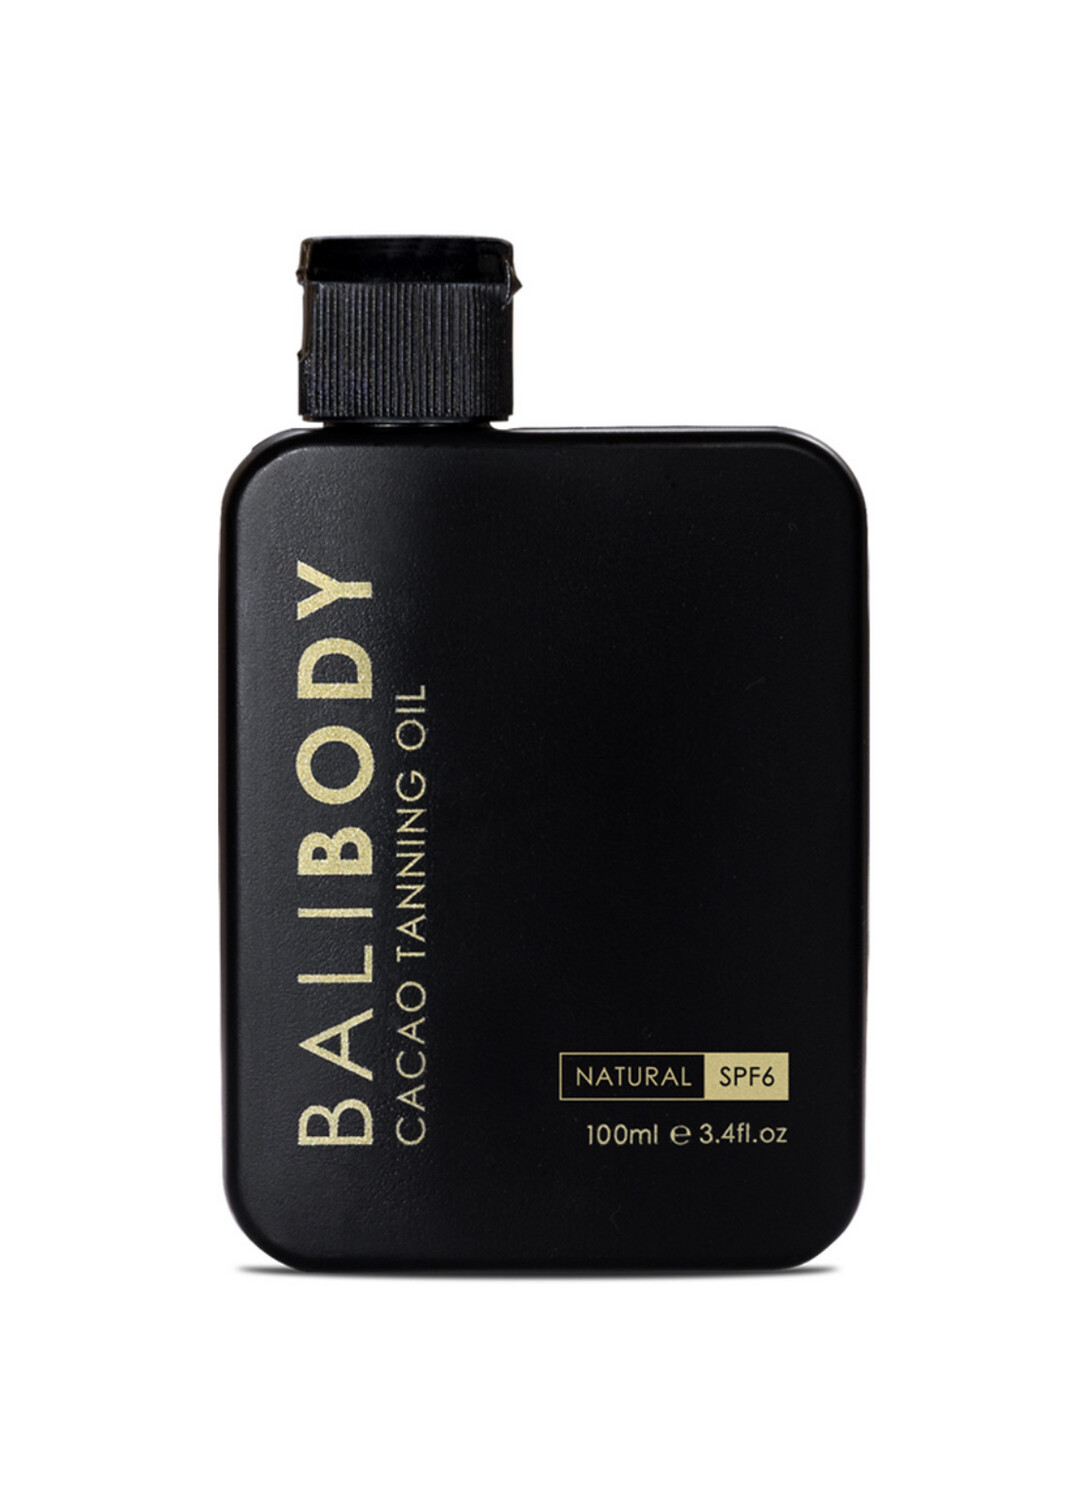 Bali Body - Cacao Tanning Oil SPF6